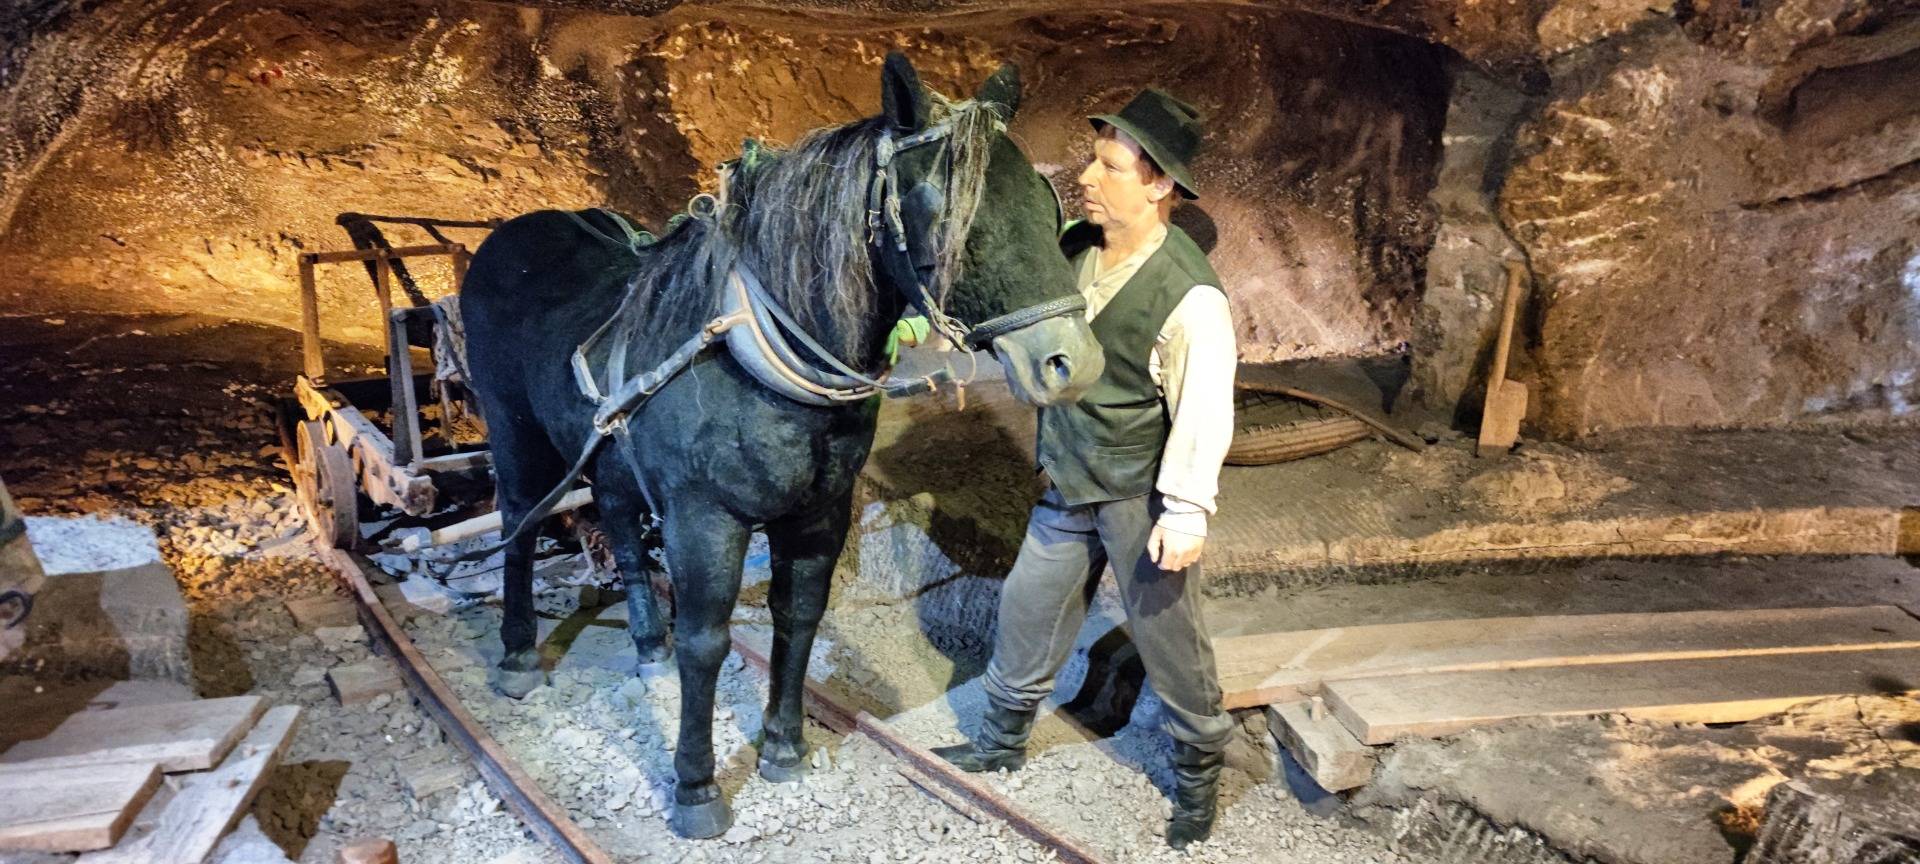 A miner with his horse